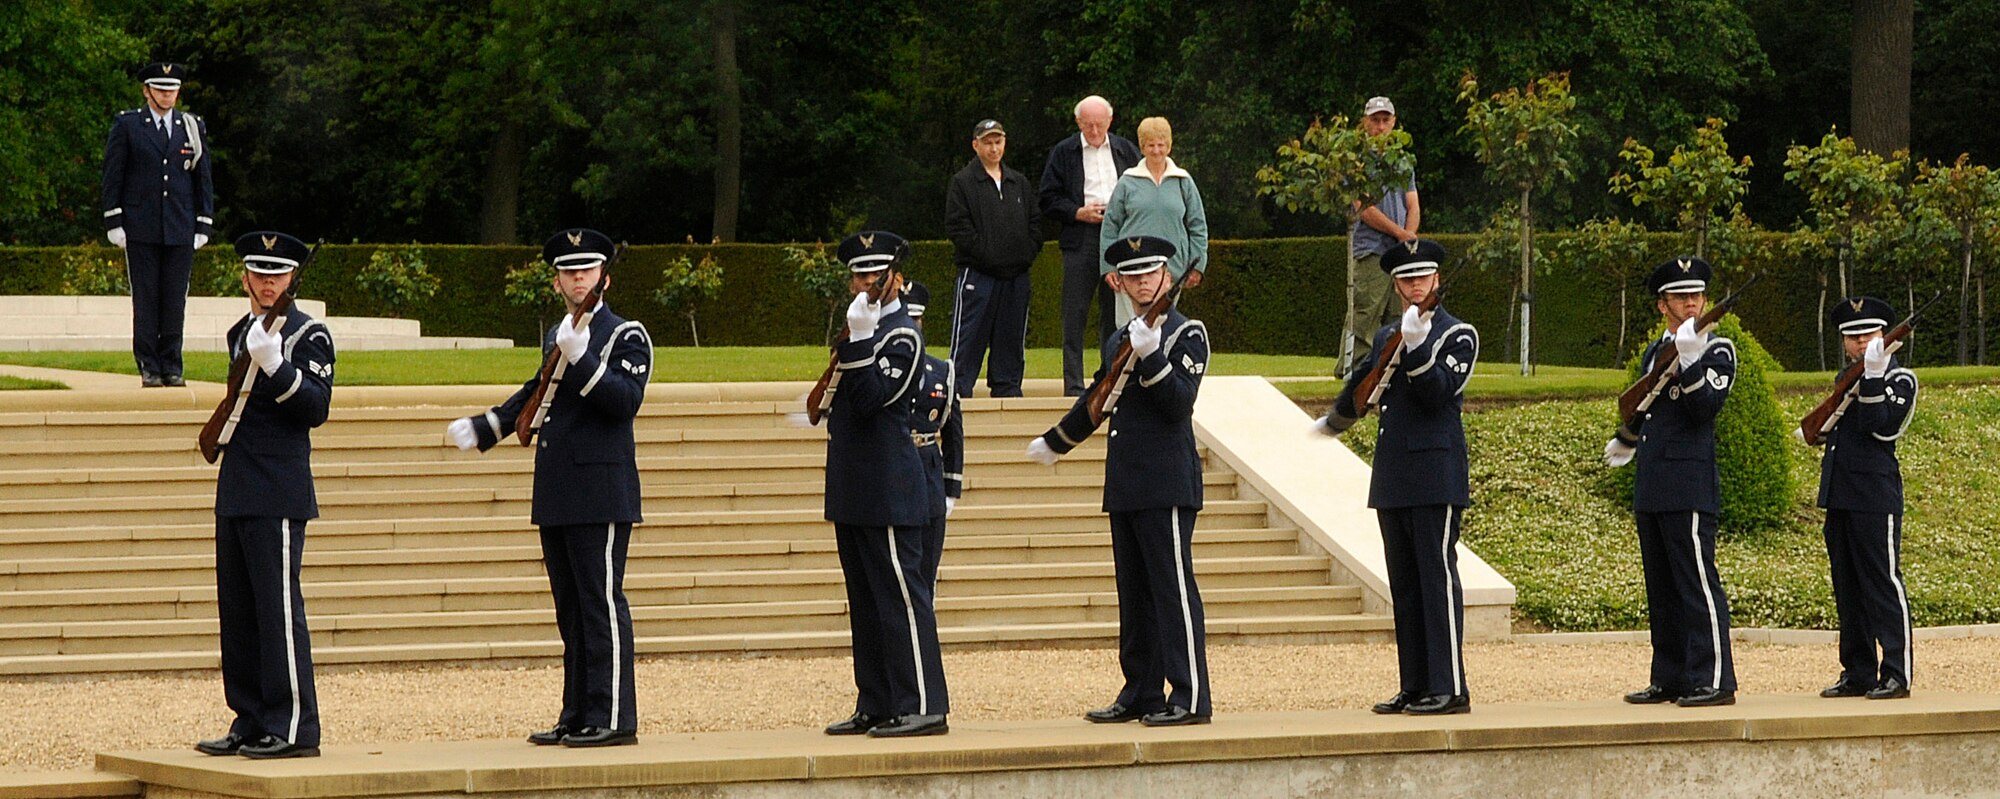 The RAF Mildenhall Honor Guard fires a 21-gun salute to honor the veterans buried at Madingley Memorial Cemetery on Memorial Day, May 25, 2009.  This year's ceremony is open to all and will be held May 31, at 11 a.m.  (U.S. Air Force file photo/Staff Sgt. Christopher L. Ingersoll)